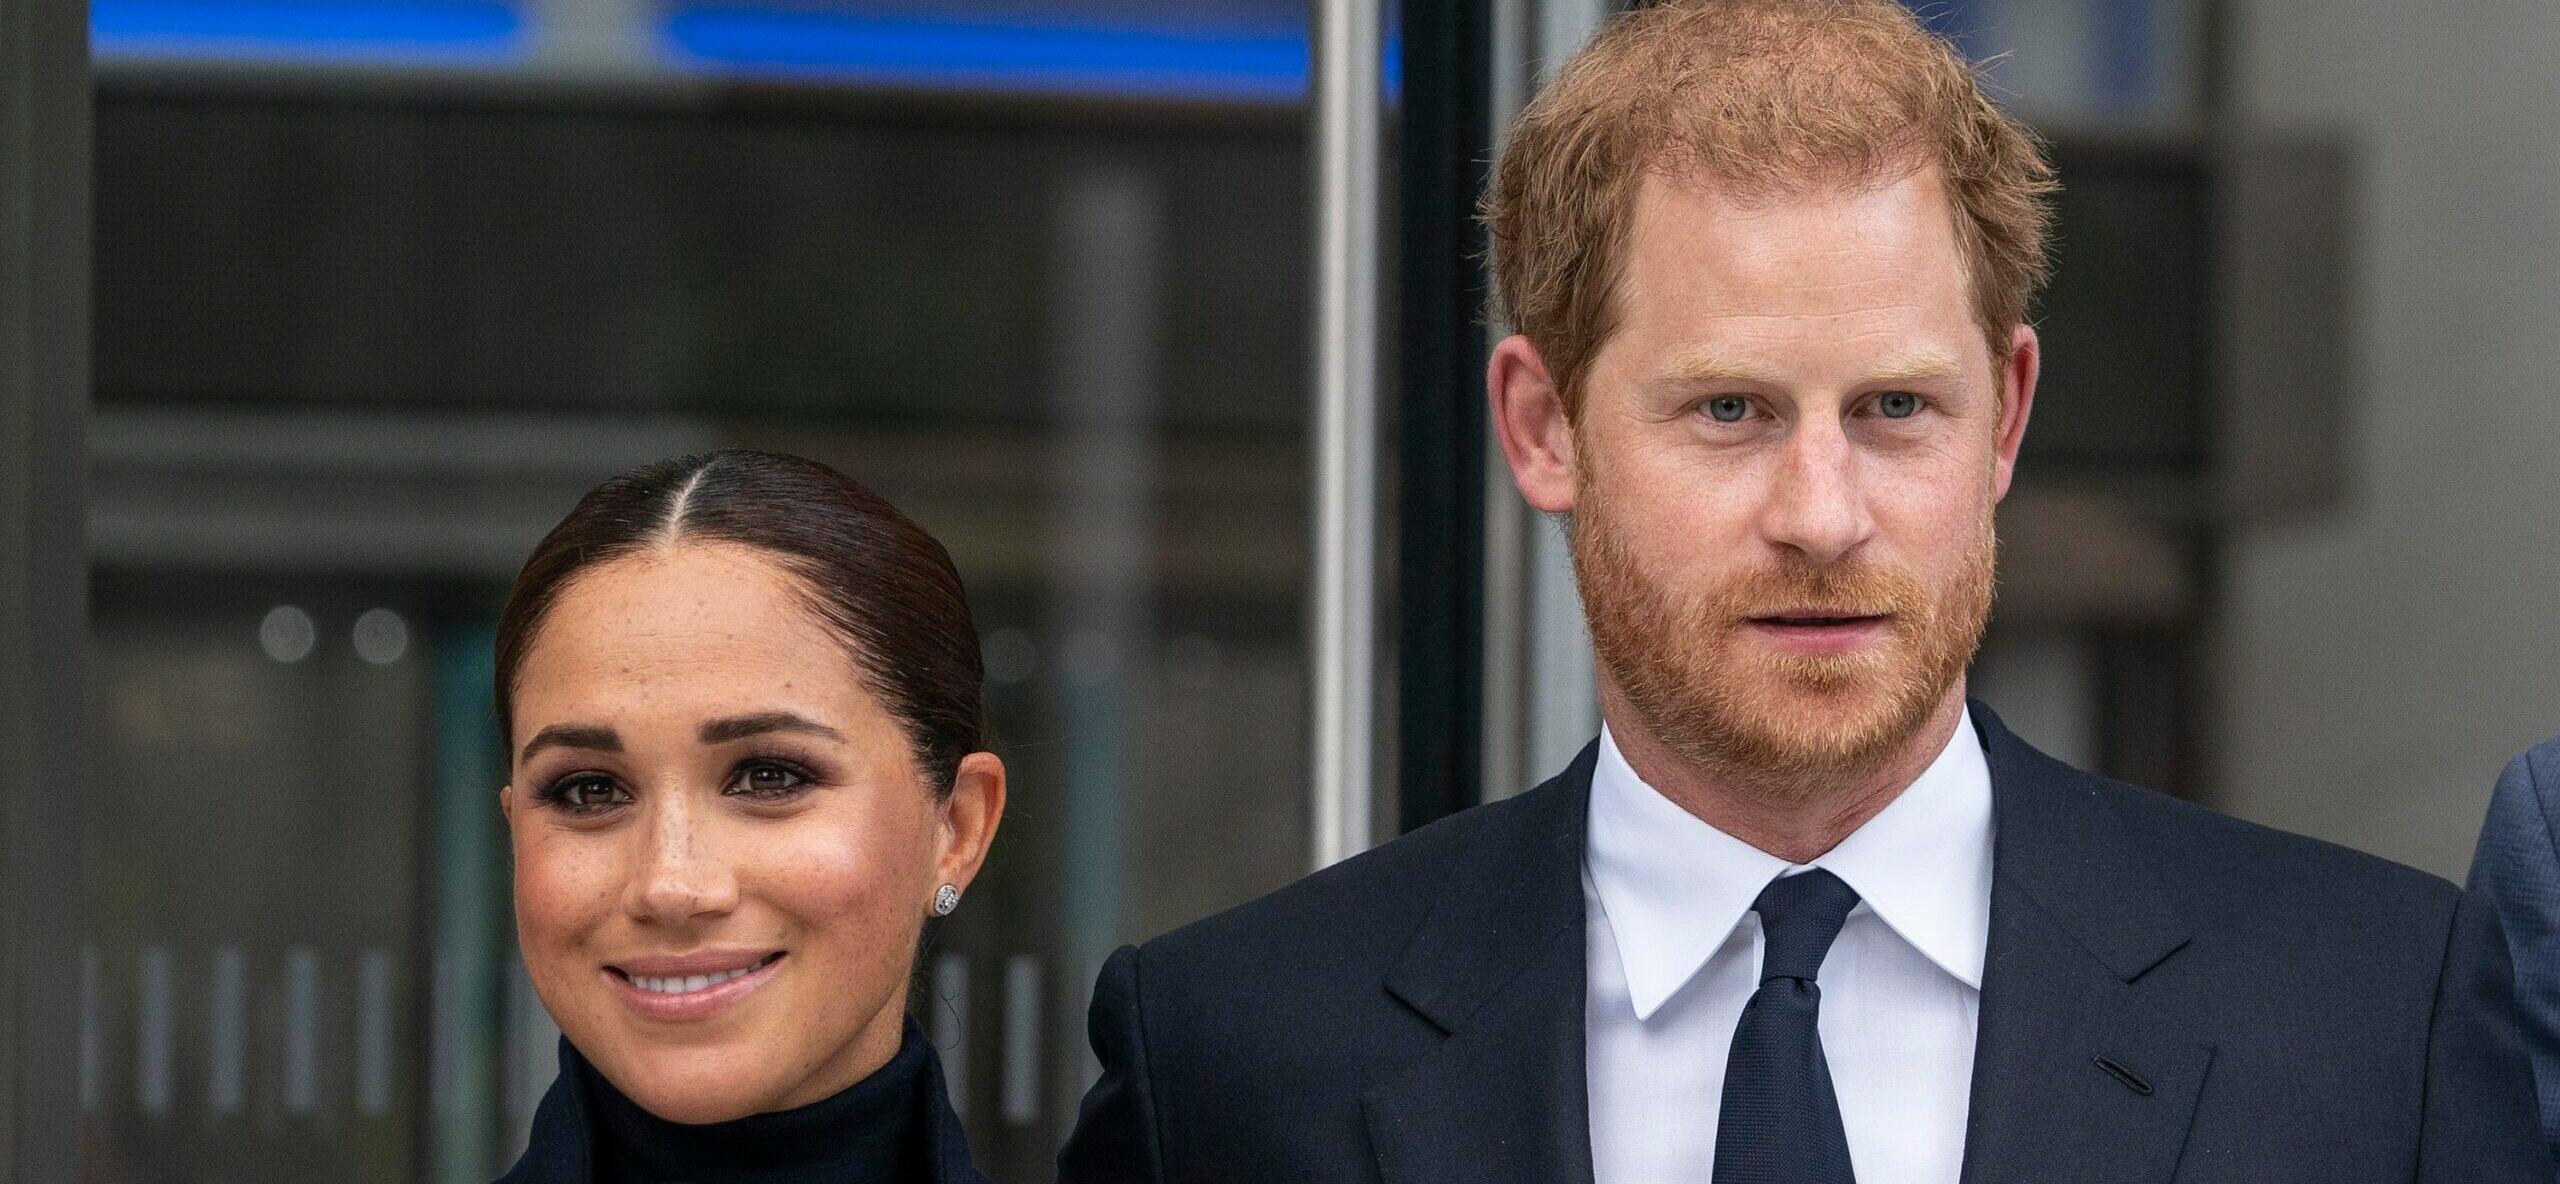 The Duke and Duchess of Sussex visit One World Observatory